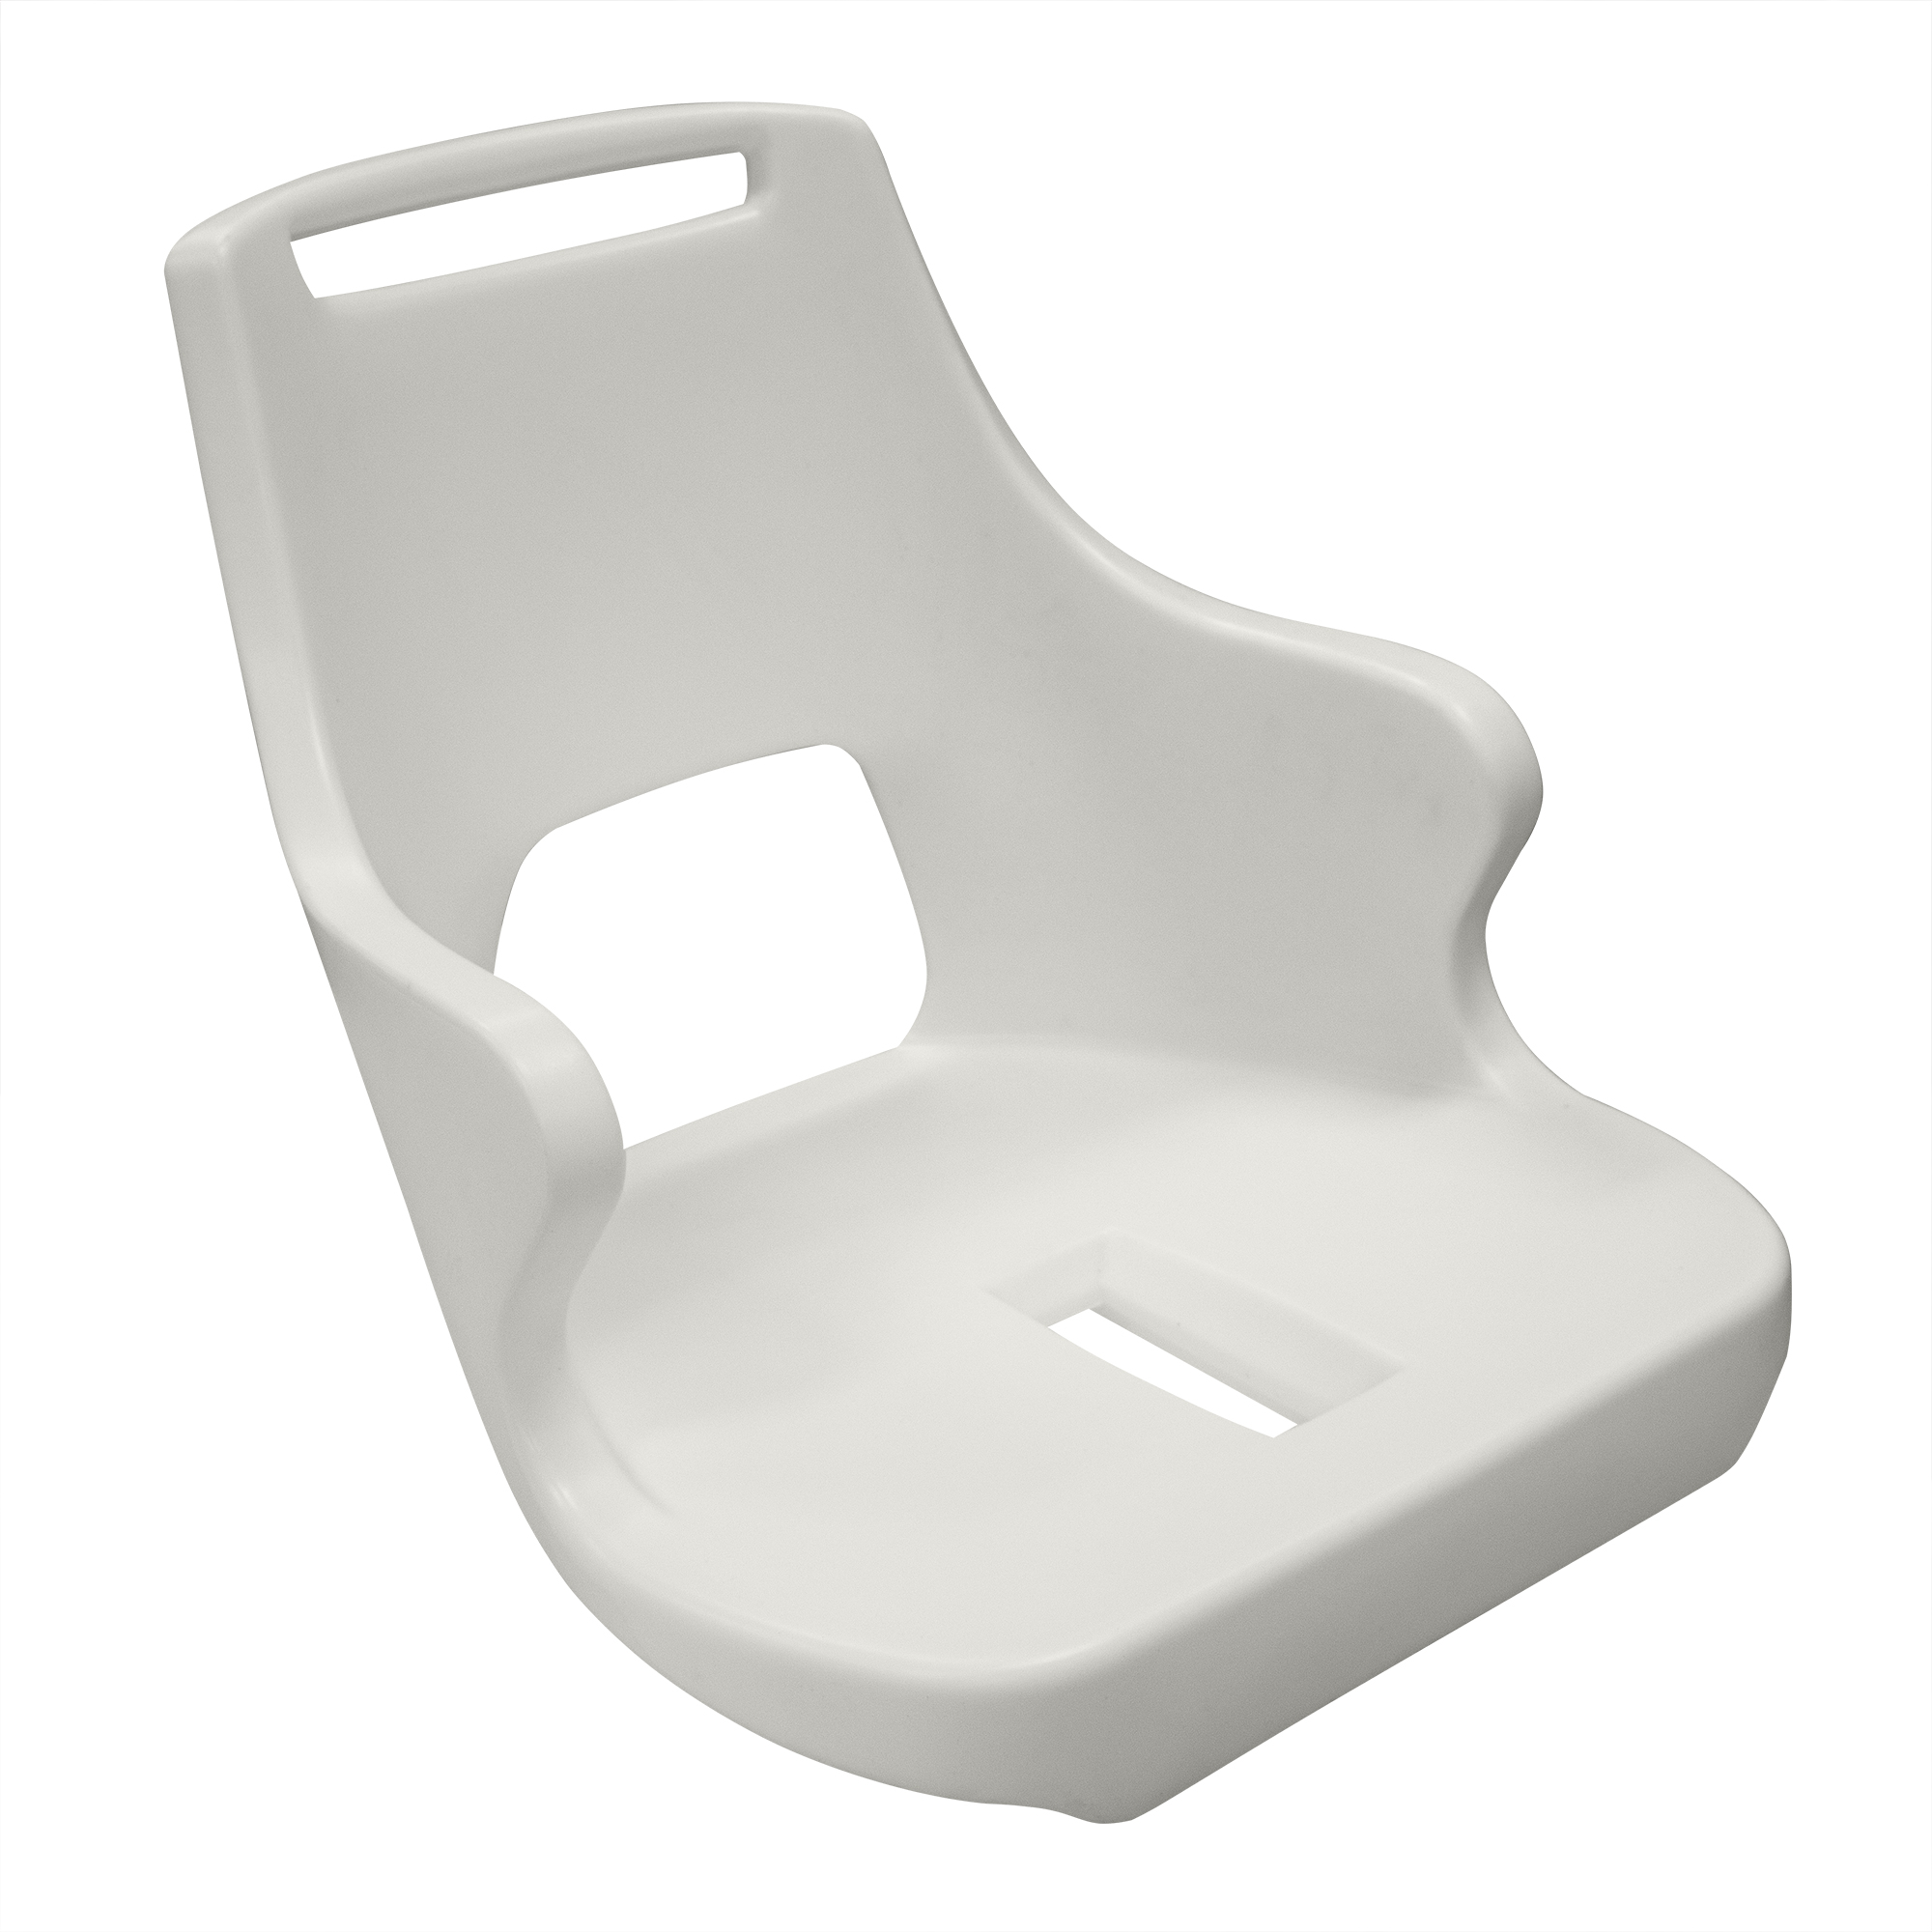 Wise 8WD015-1-710 Standard Pilot Chair with Arm Rests, Rotomolded Shell Only - image 1 of 6